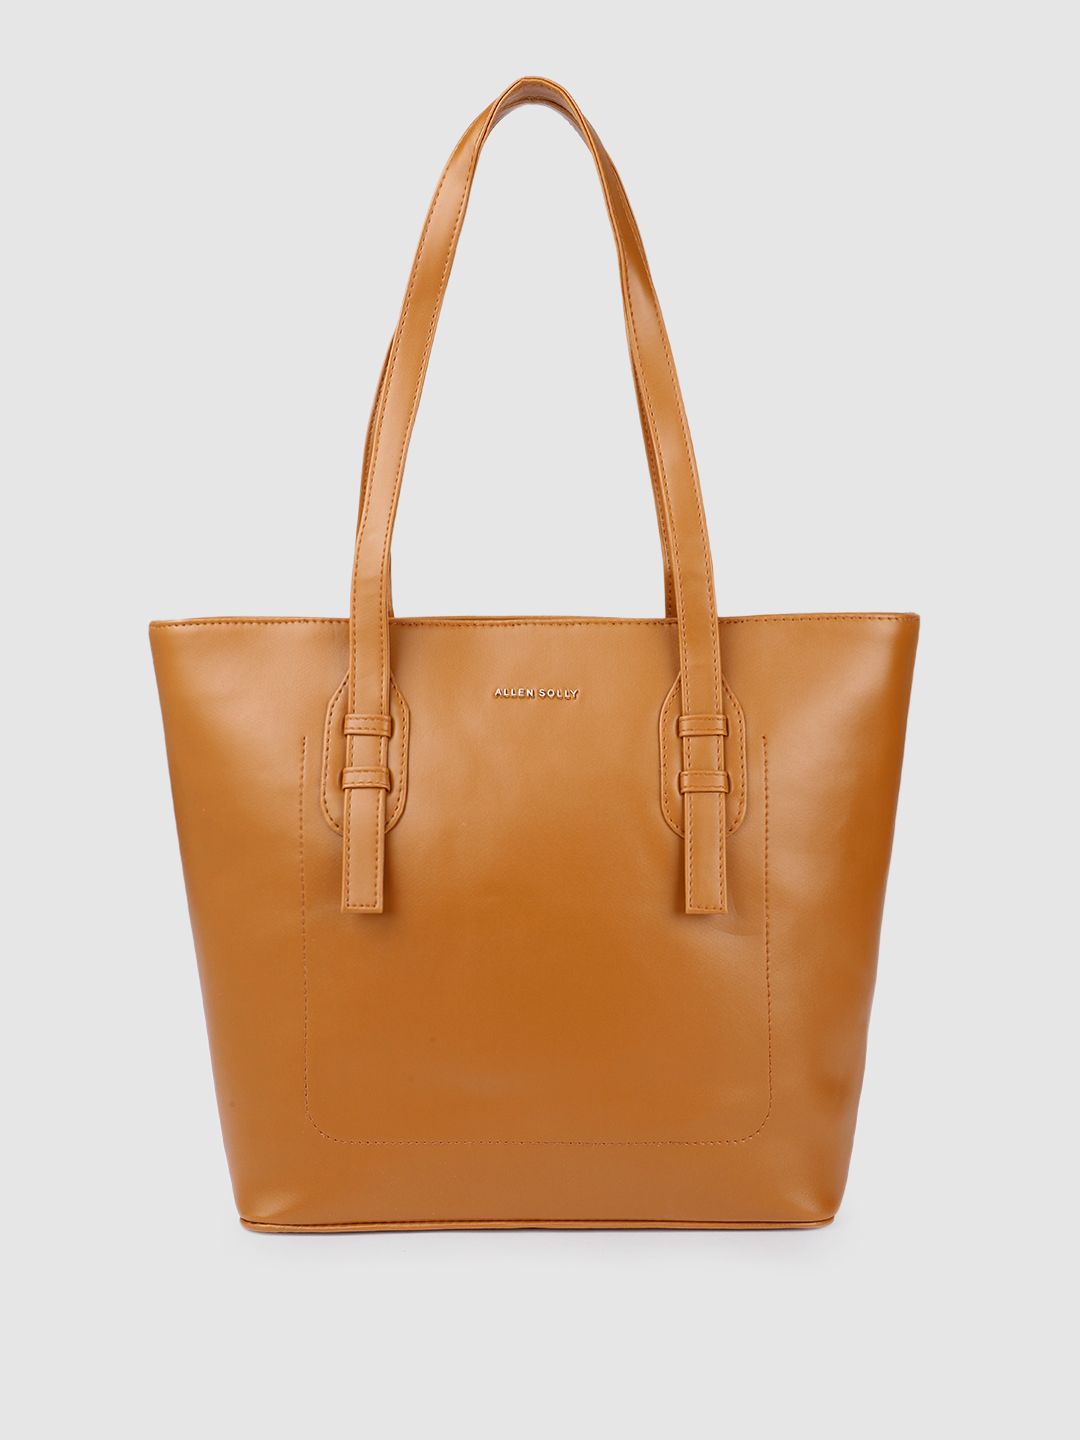 Allen Solly Tan Brown Solid Structured Shoulder Bag Price in India